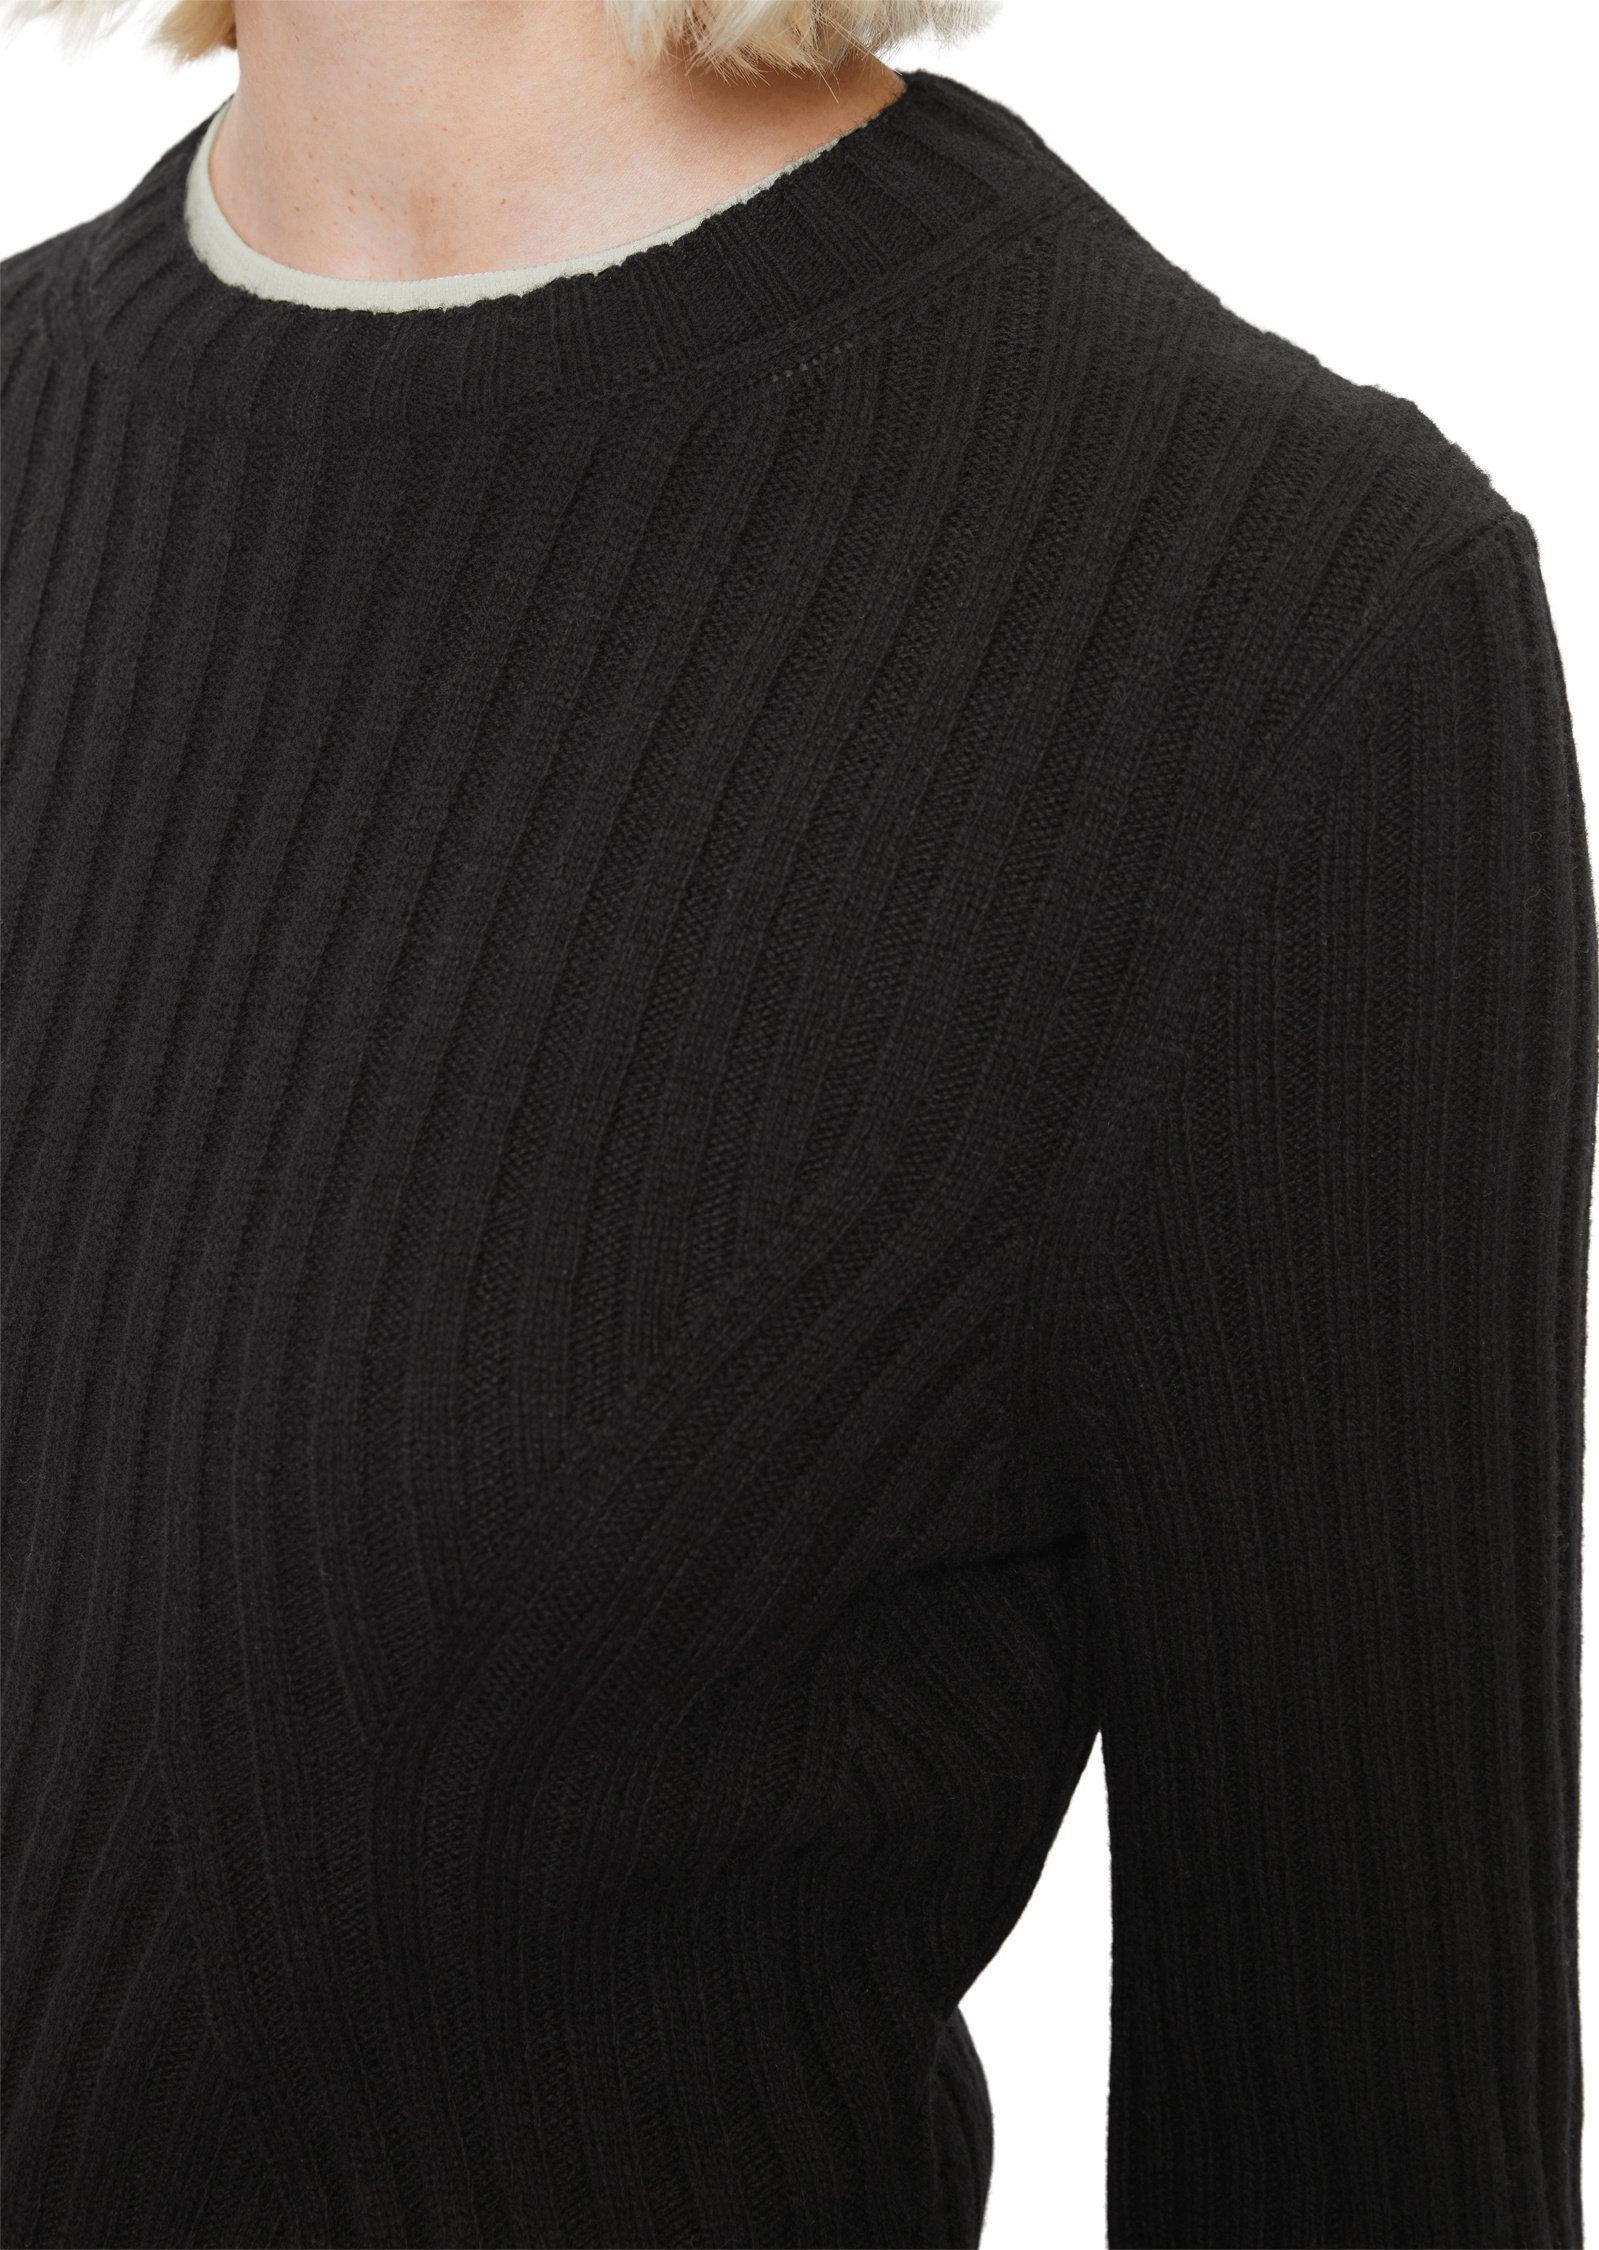 fashioned Details mit O'Polo Fully Strickpullover Marc schwarz